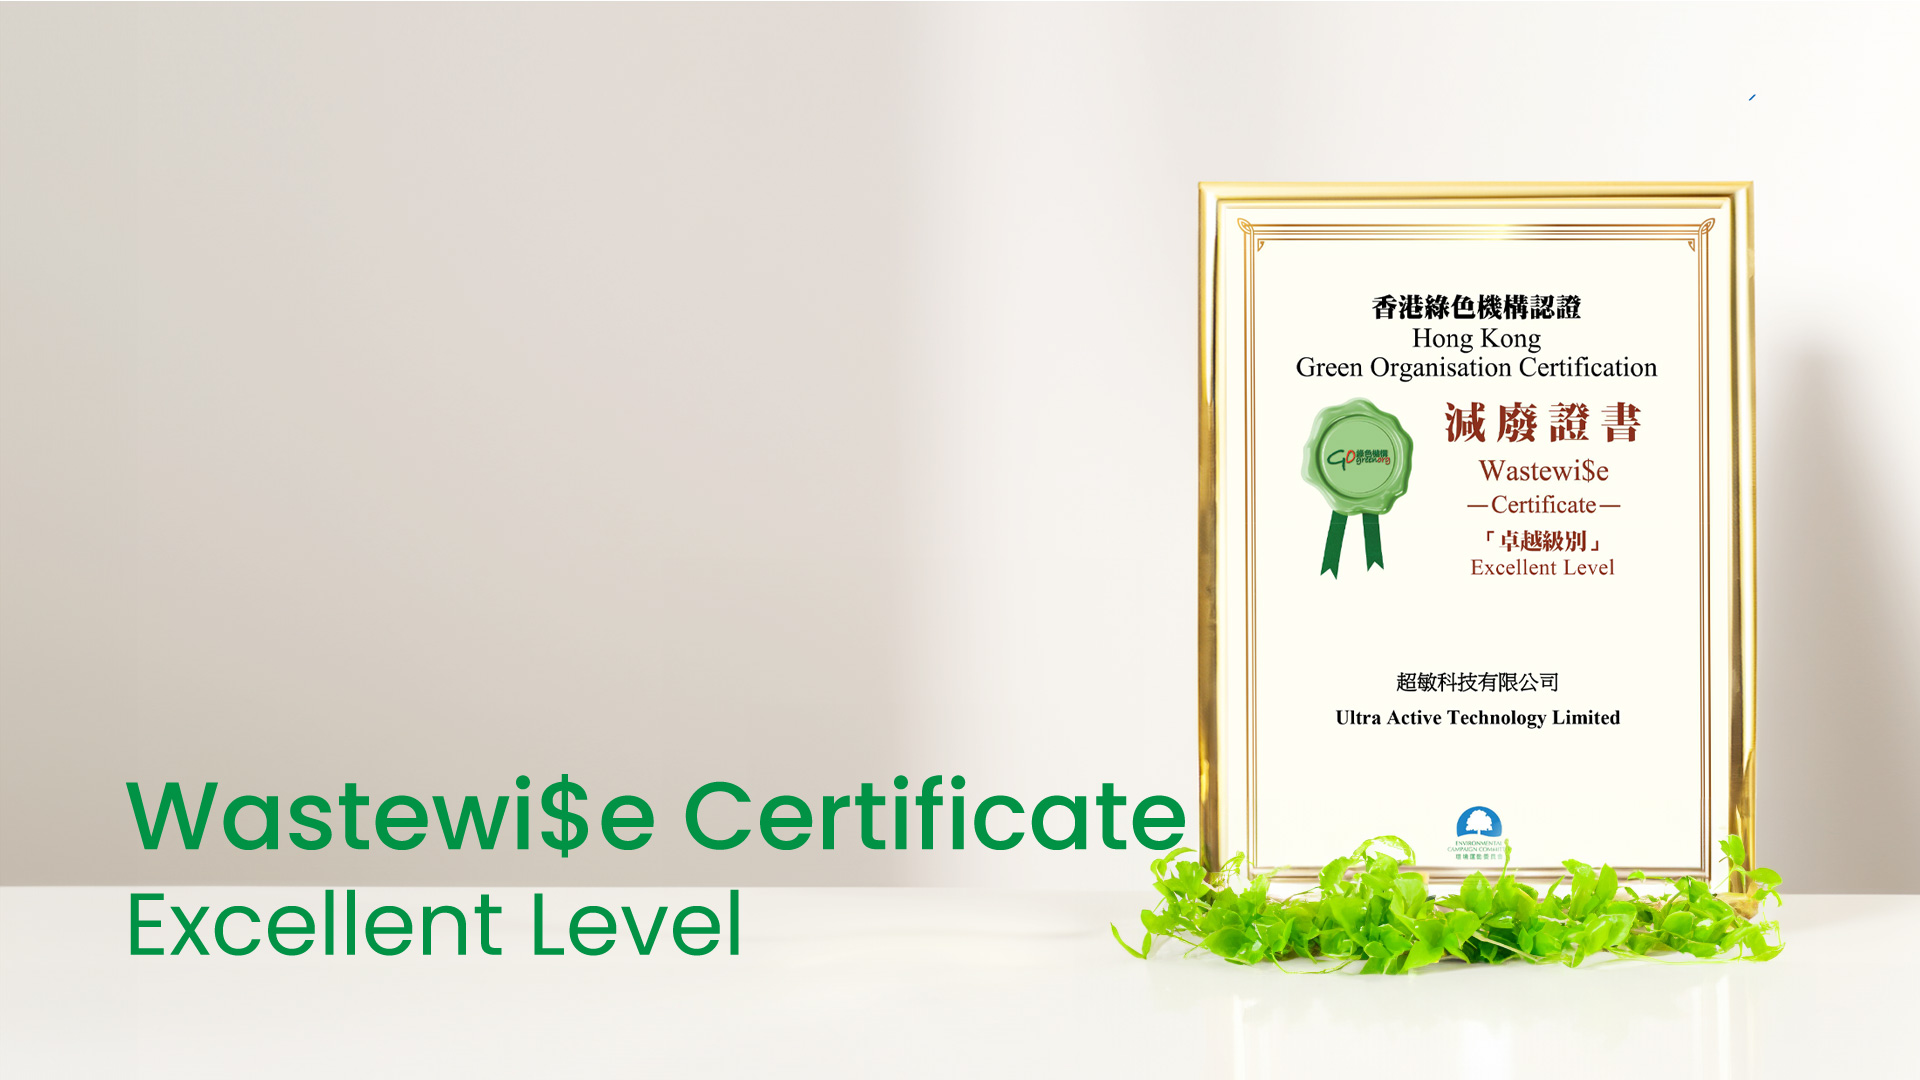 UAT is continuously awarded Wastewi$e Certificate- Excellent Level